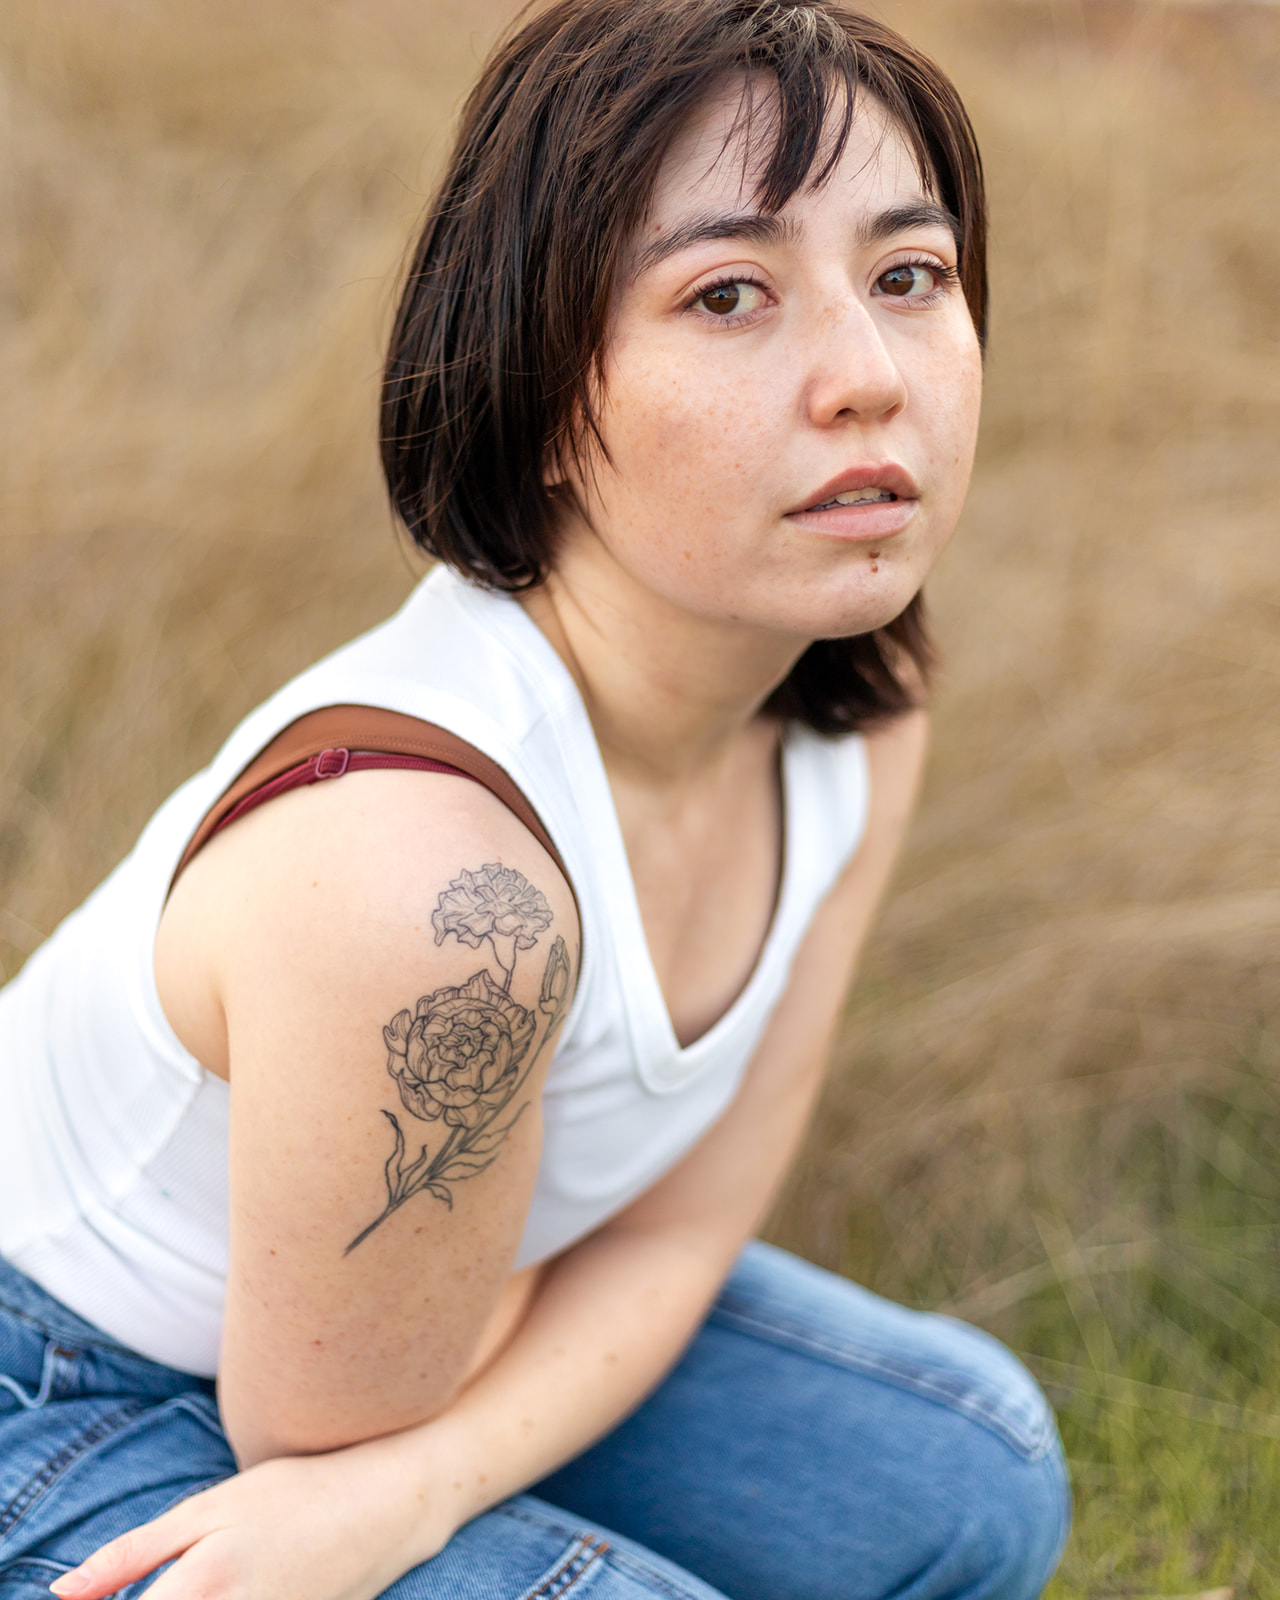 nonbinary person portrait showing off tattoo